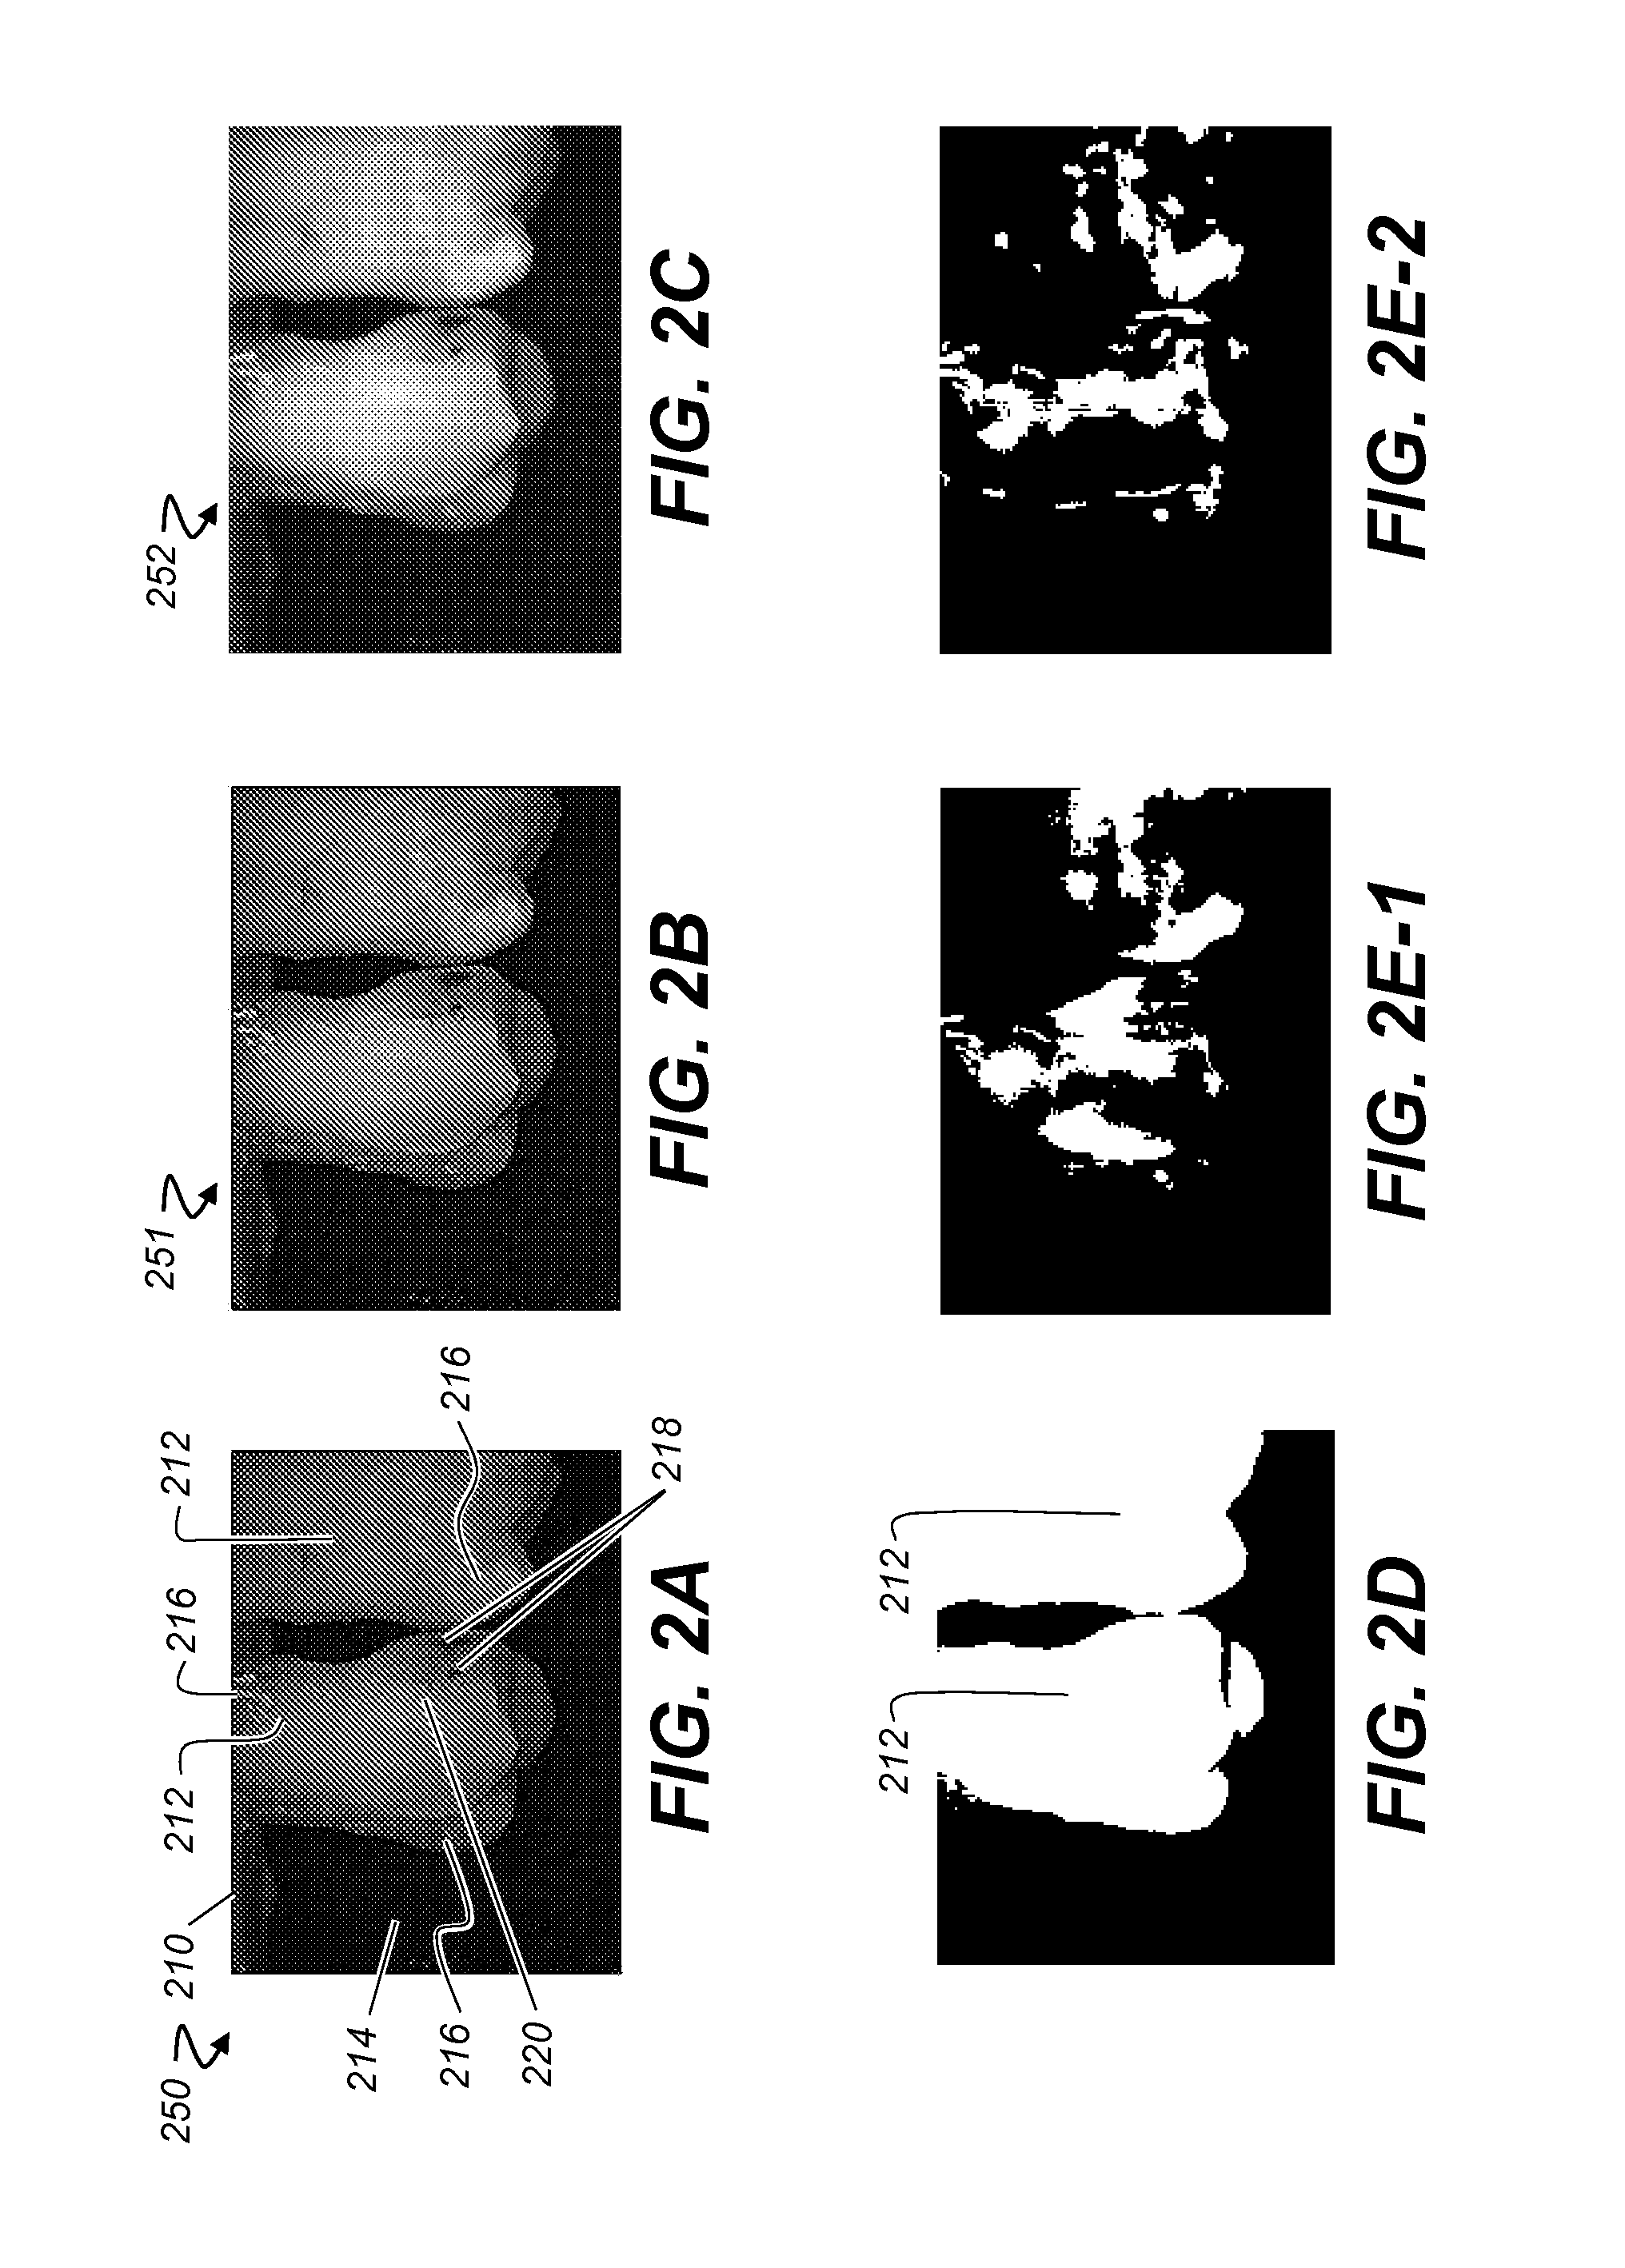 Method for identification of dental caries in polychromatic images